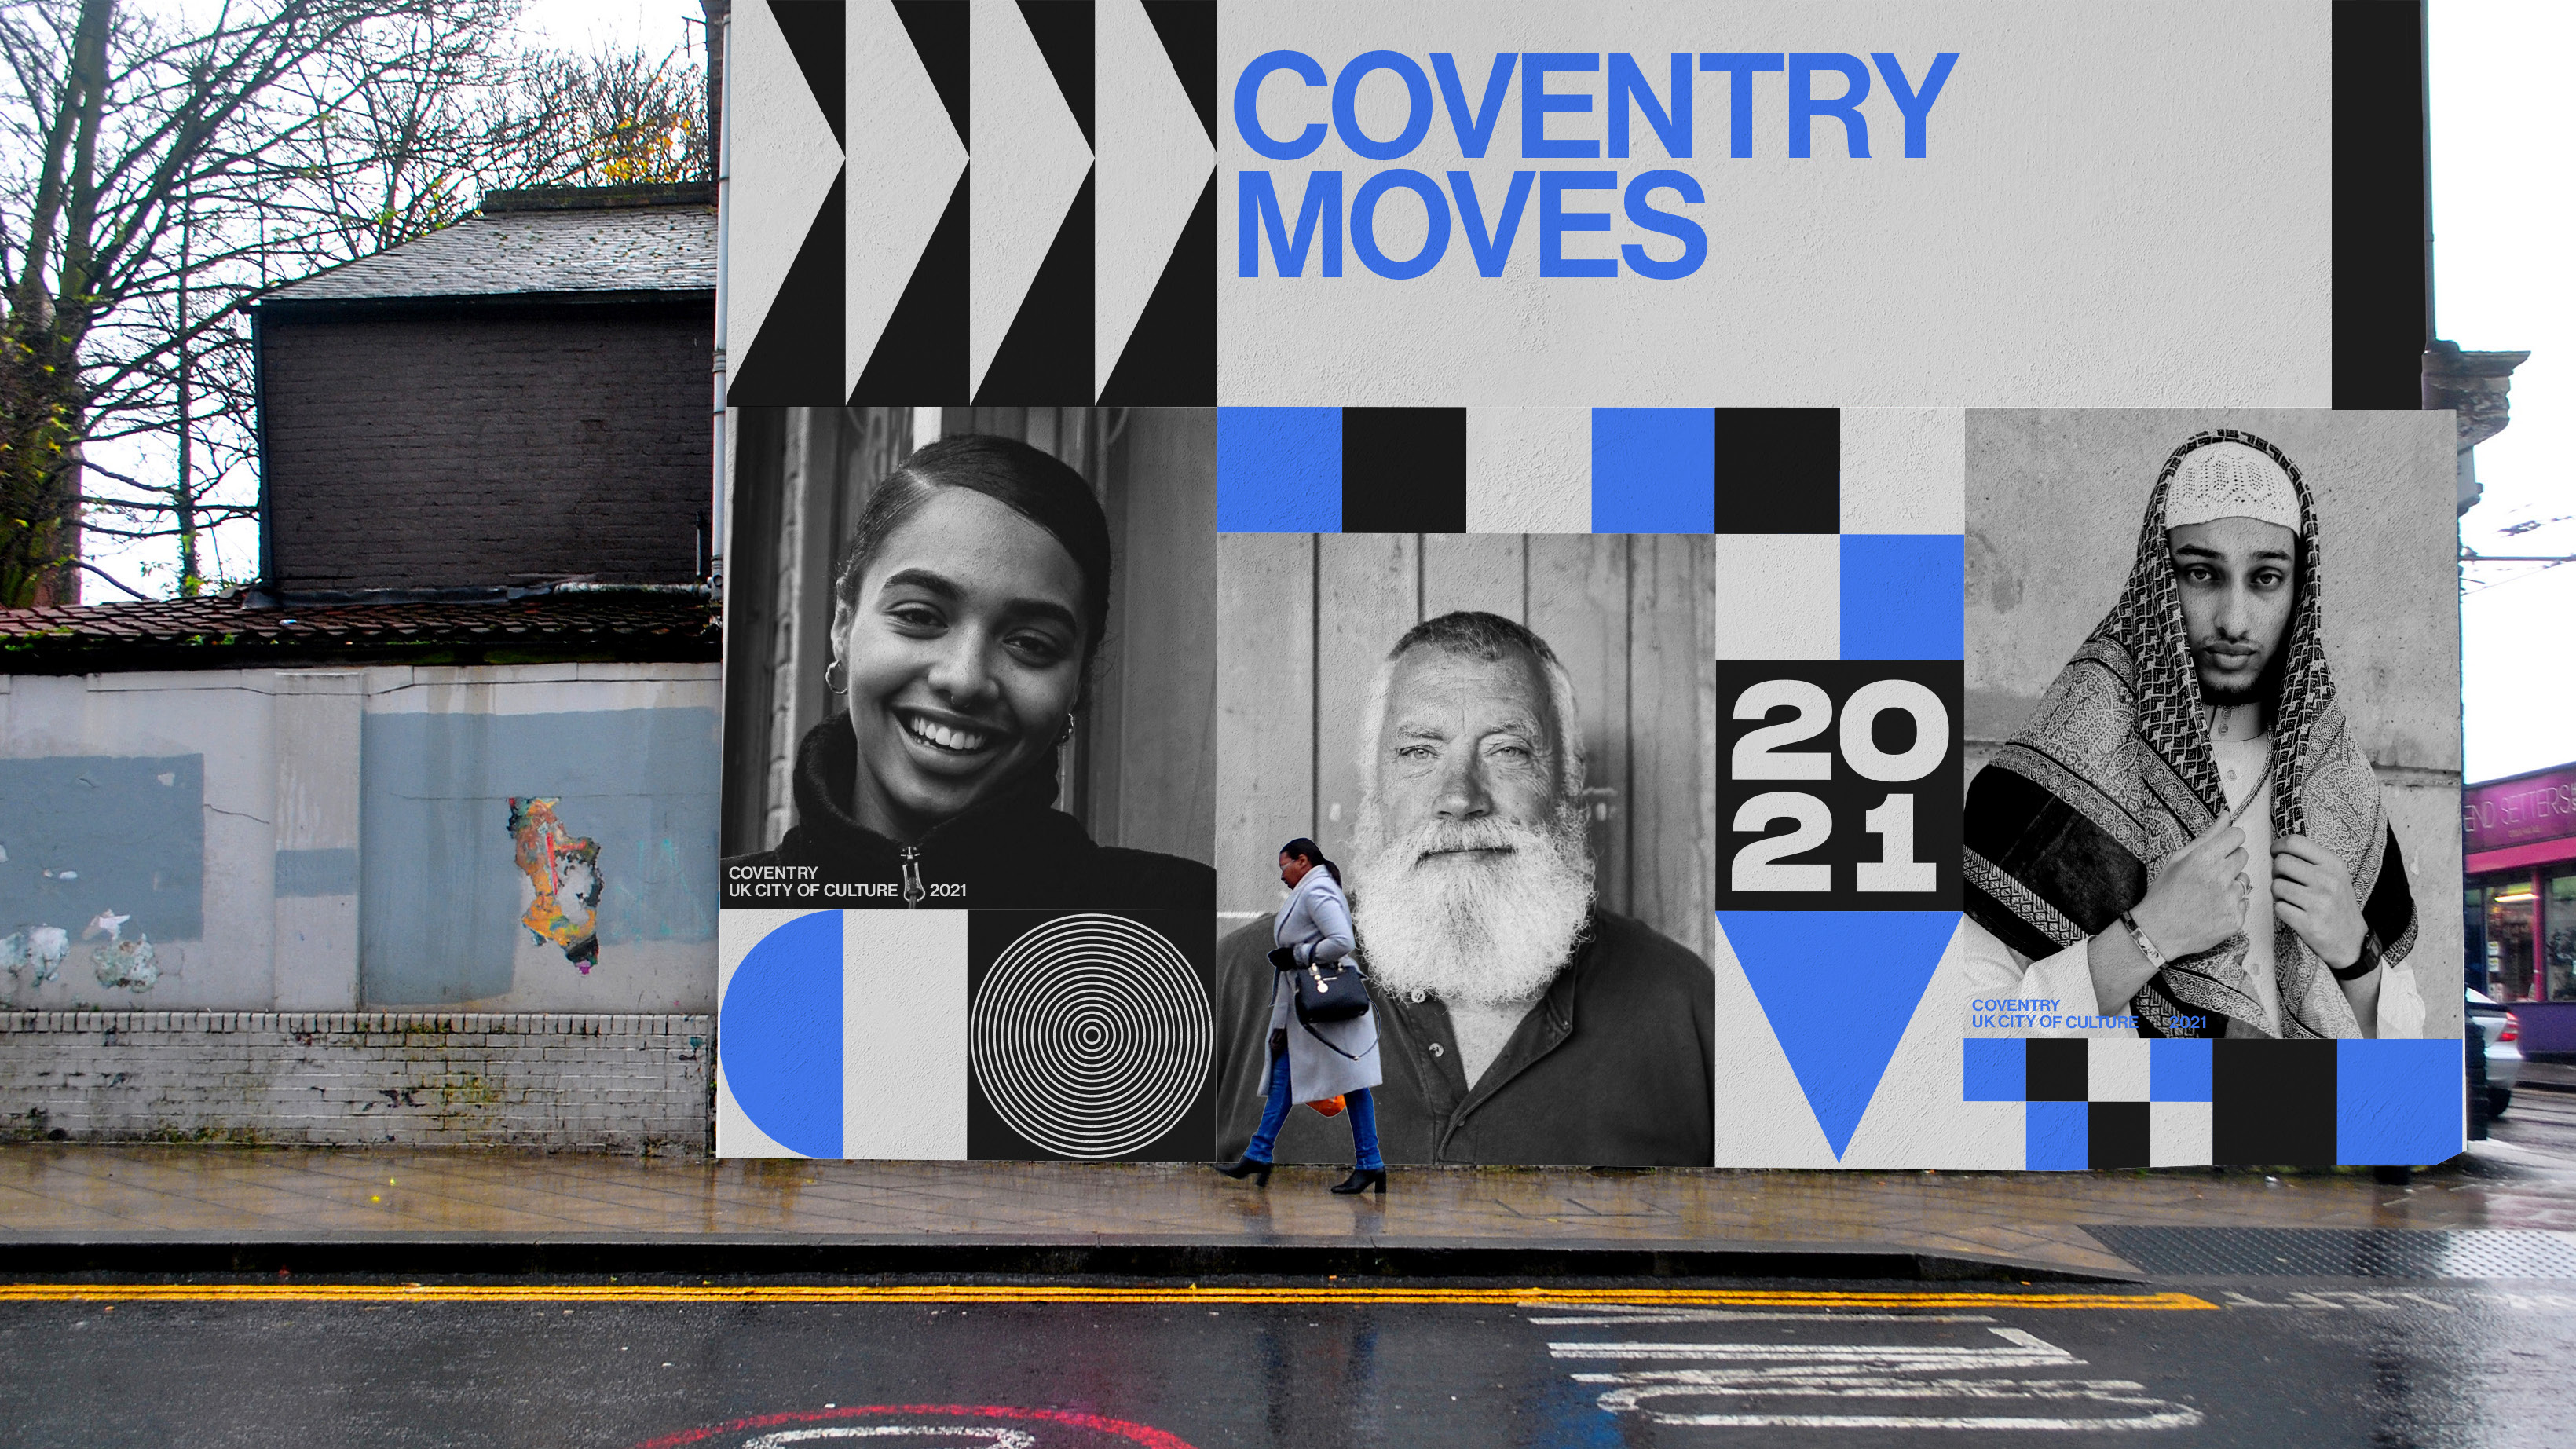 2020-07/coventry-moves-ooh-4